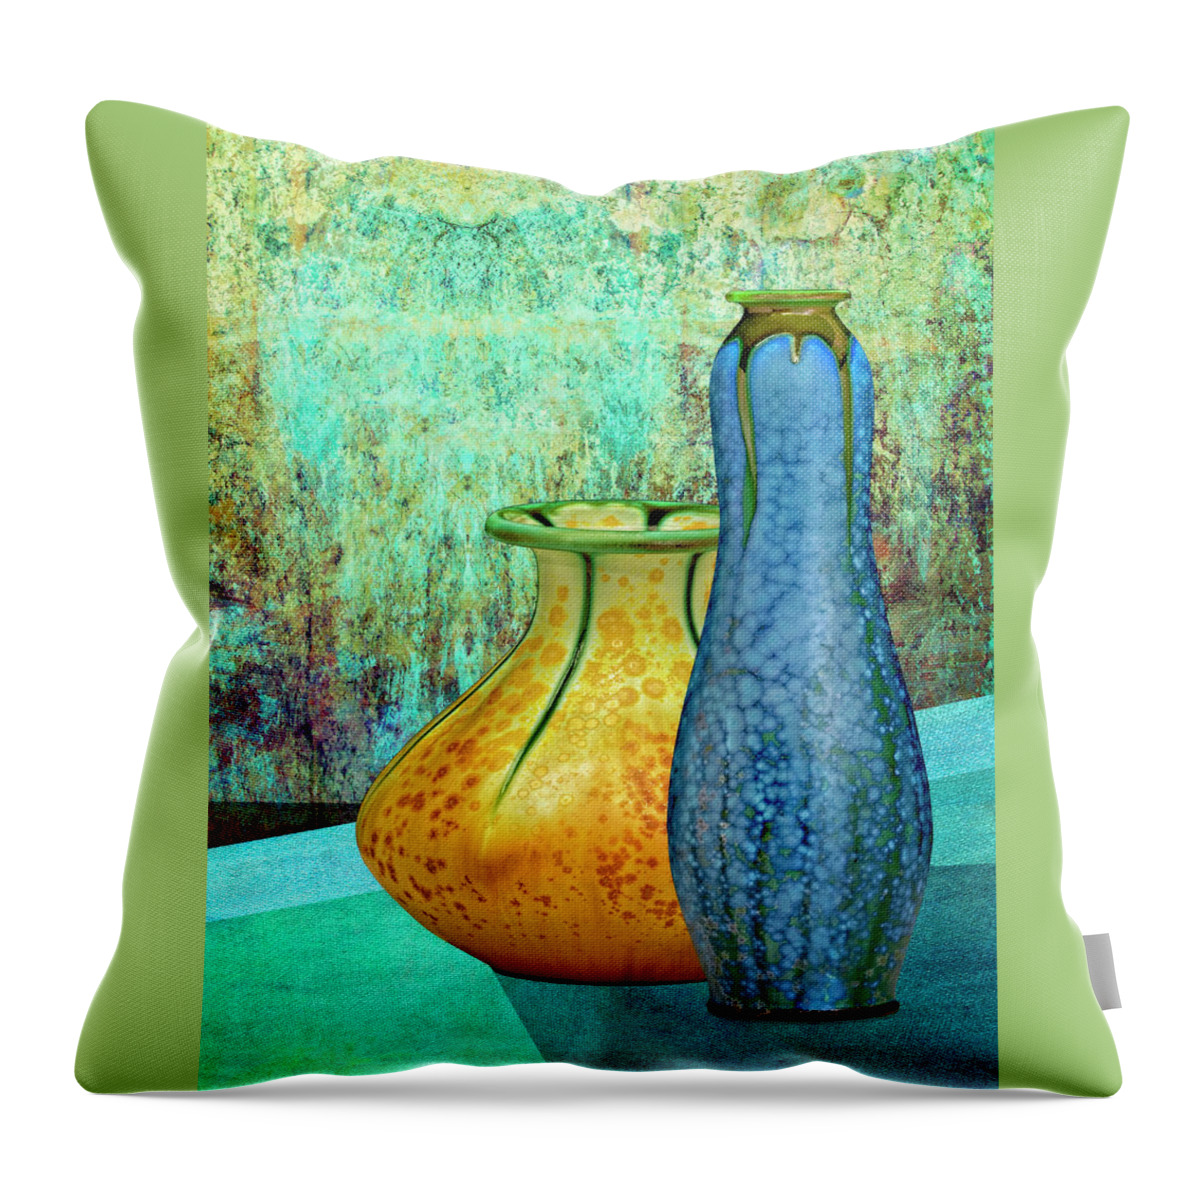 Still Life Throw Pillow featuring the digital art Blue and Yellow Vases by Sandra Selle Rodriguez